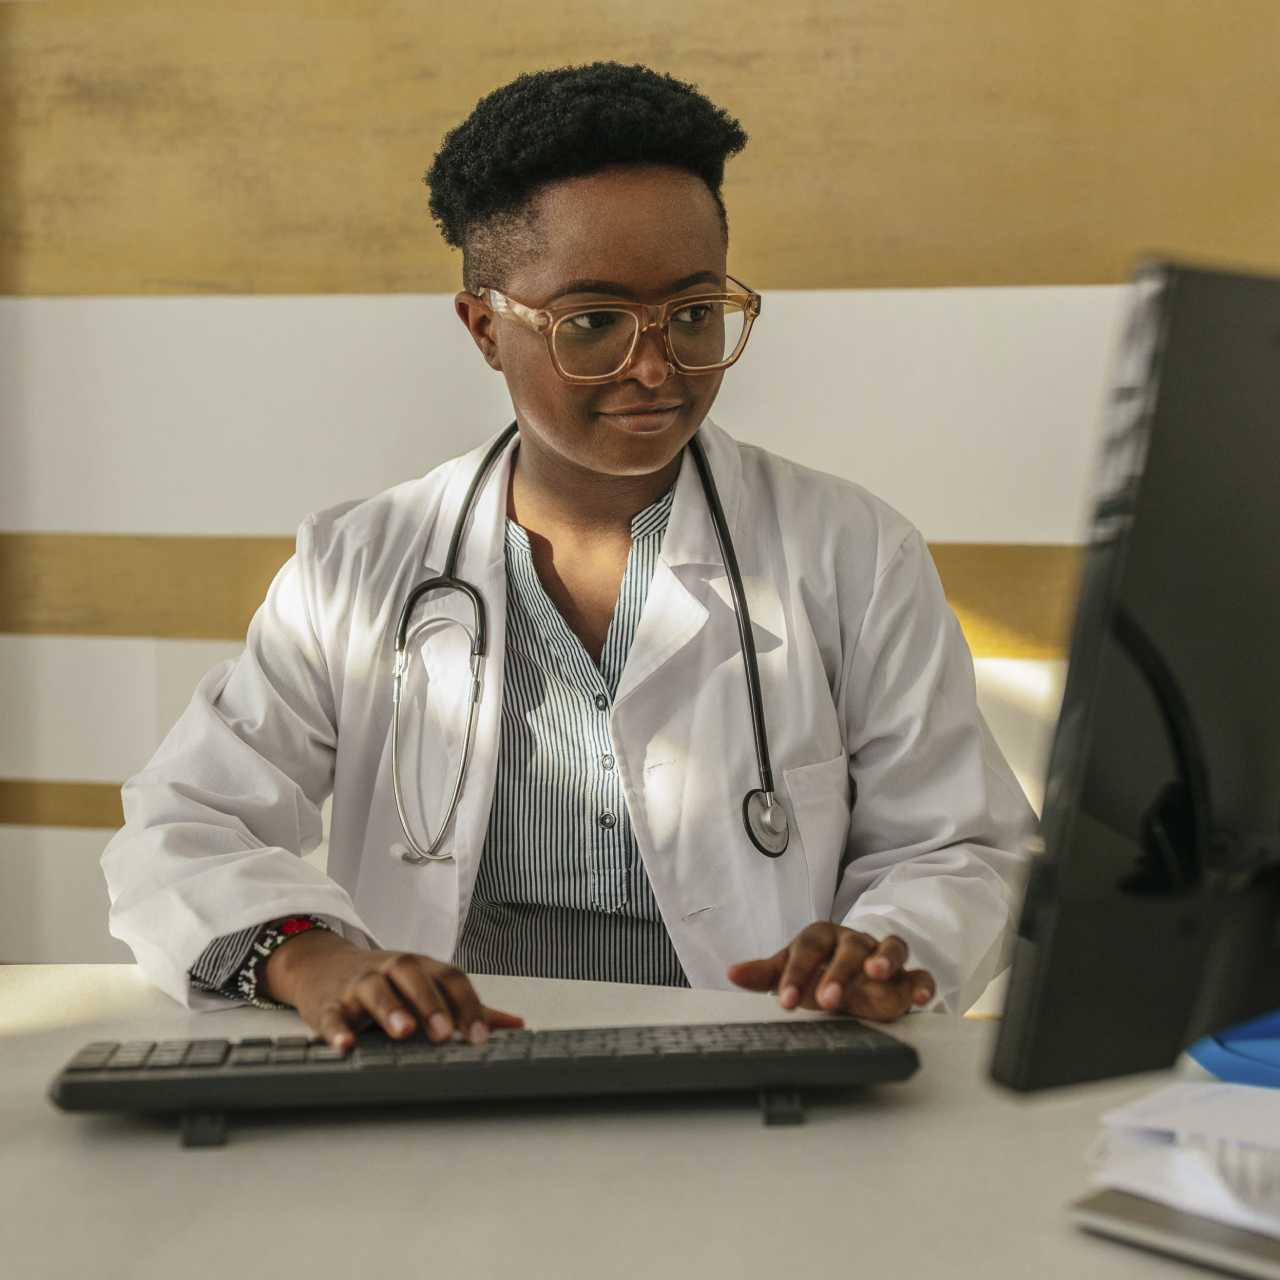 A doctor in white coat and a stethoscope around neck sitting at desk and typing on desktop computer